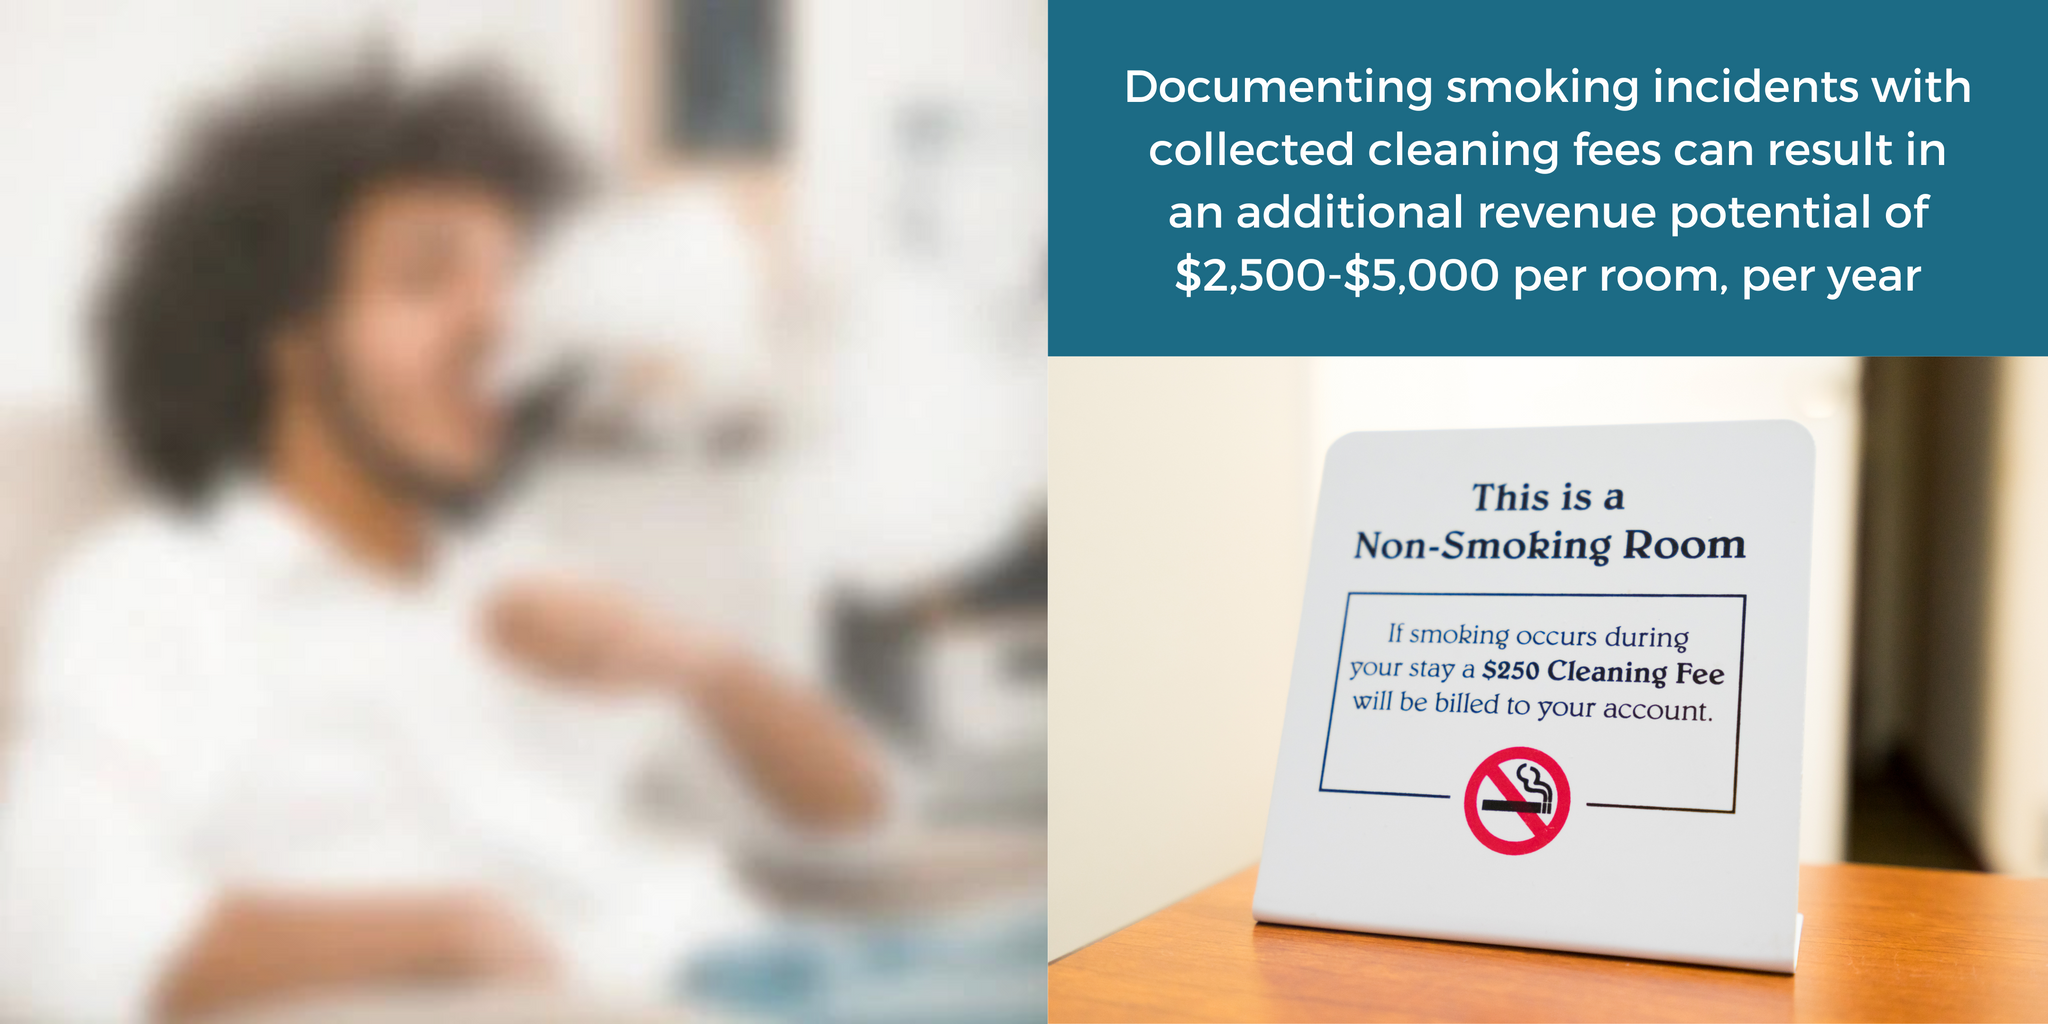 Documenting smoking incidents with collected cleaning fees can result in an additional revenue potential of $2,500-$5,000 per room, per year